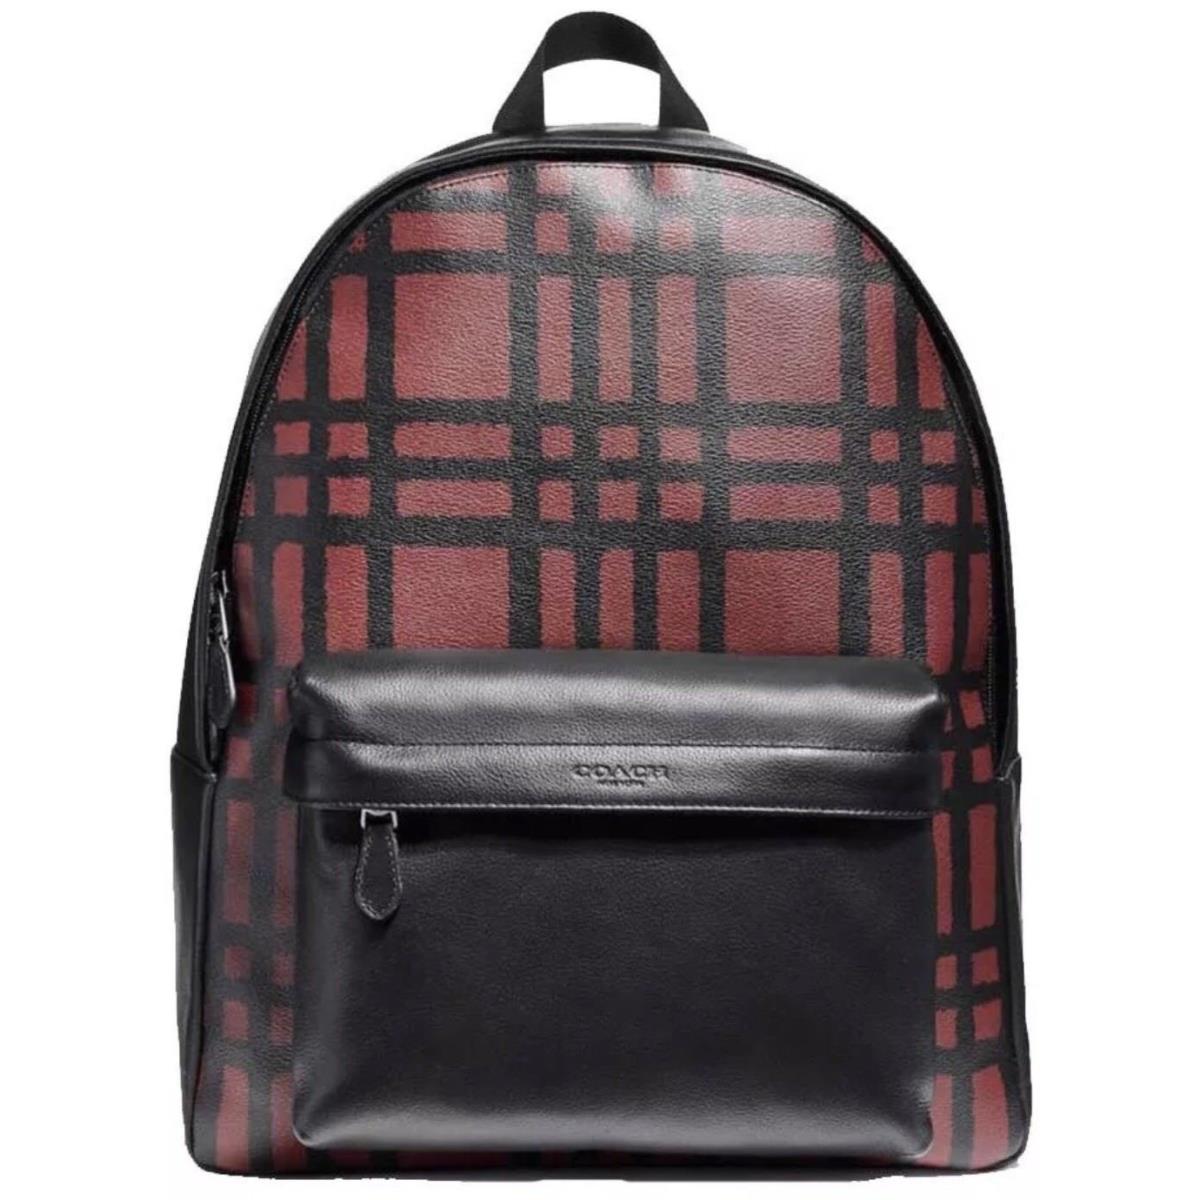 Coach Charles Backpack with Wild Plaid Print Msrp: